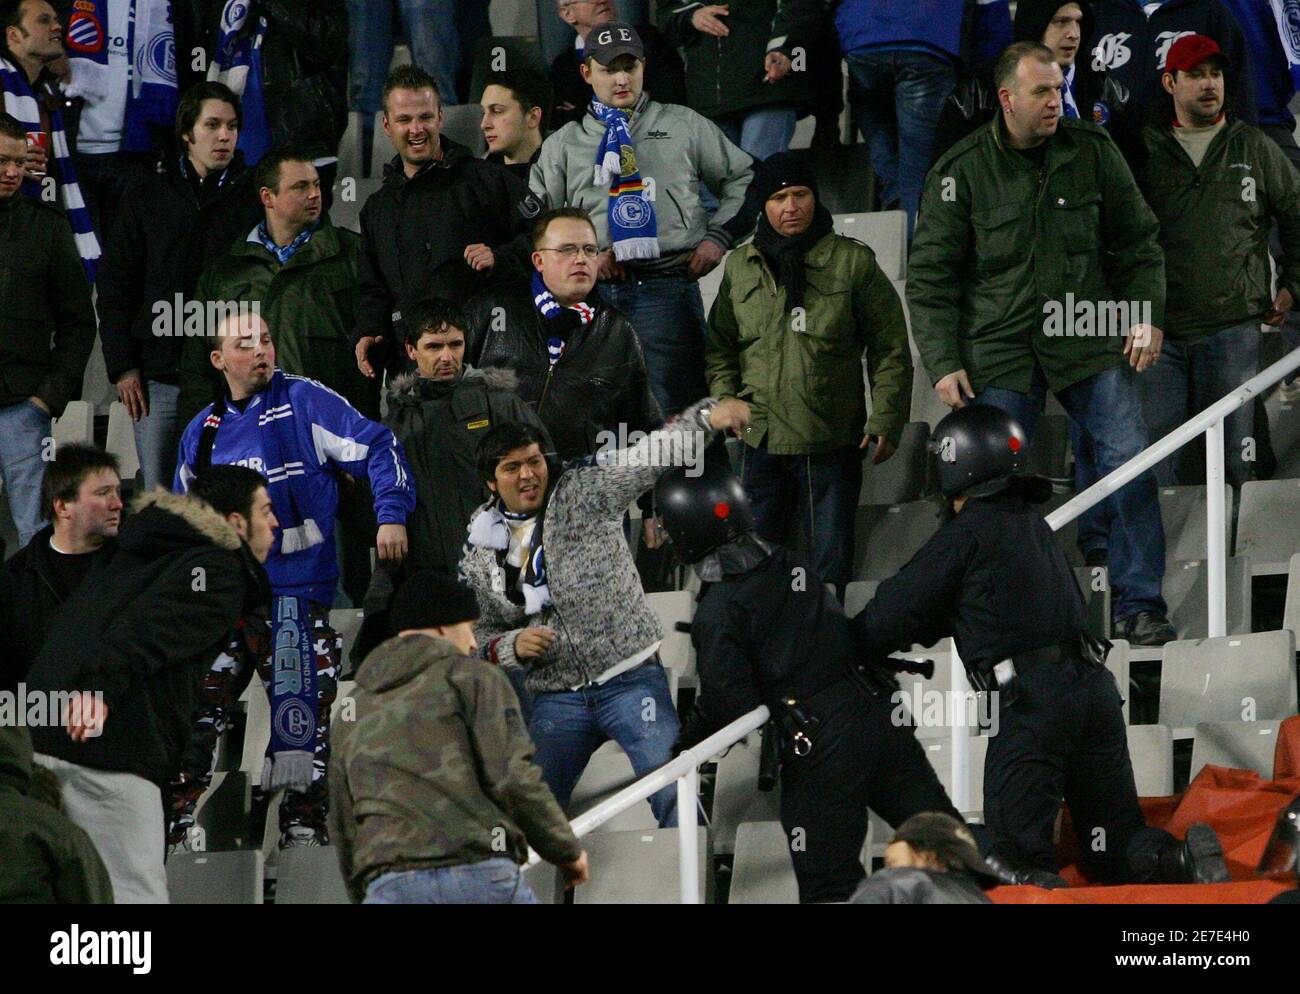 Catalan police repress German supporters of Schalke 04 during their UEFA Cup 3rd round second leg soccer match against Espanyol at Lluis Companys stadium in Barcelona, Spain, February 23, 2006. REUTERS/Gustau Nacarino Stock Photo